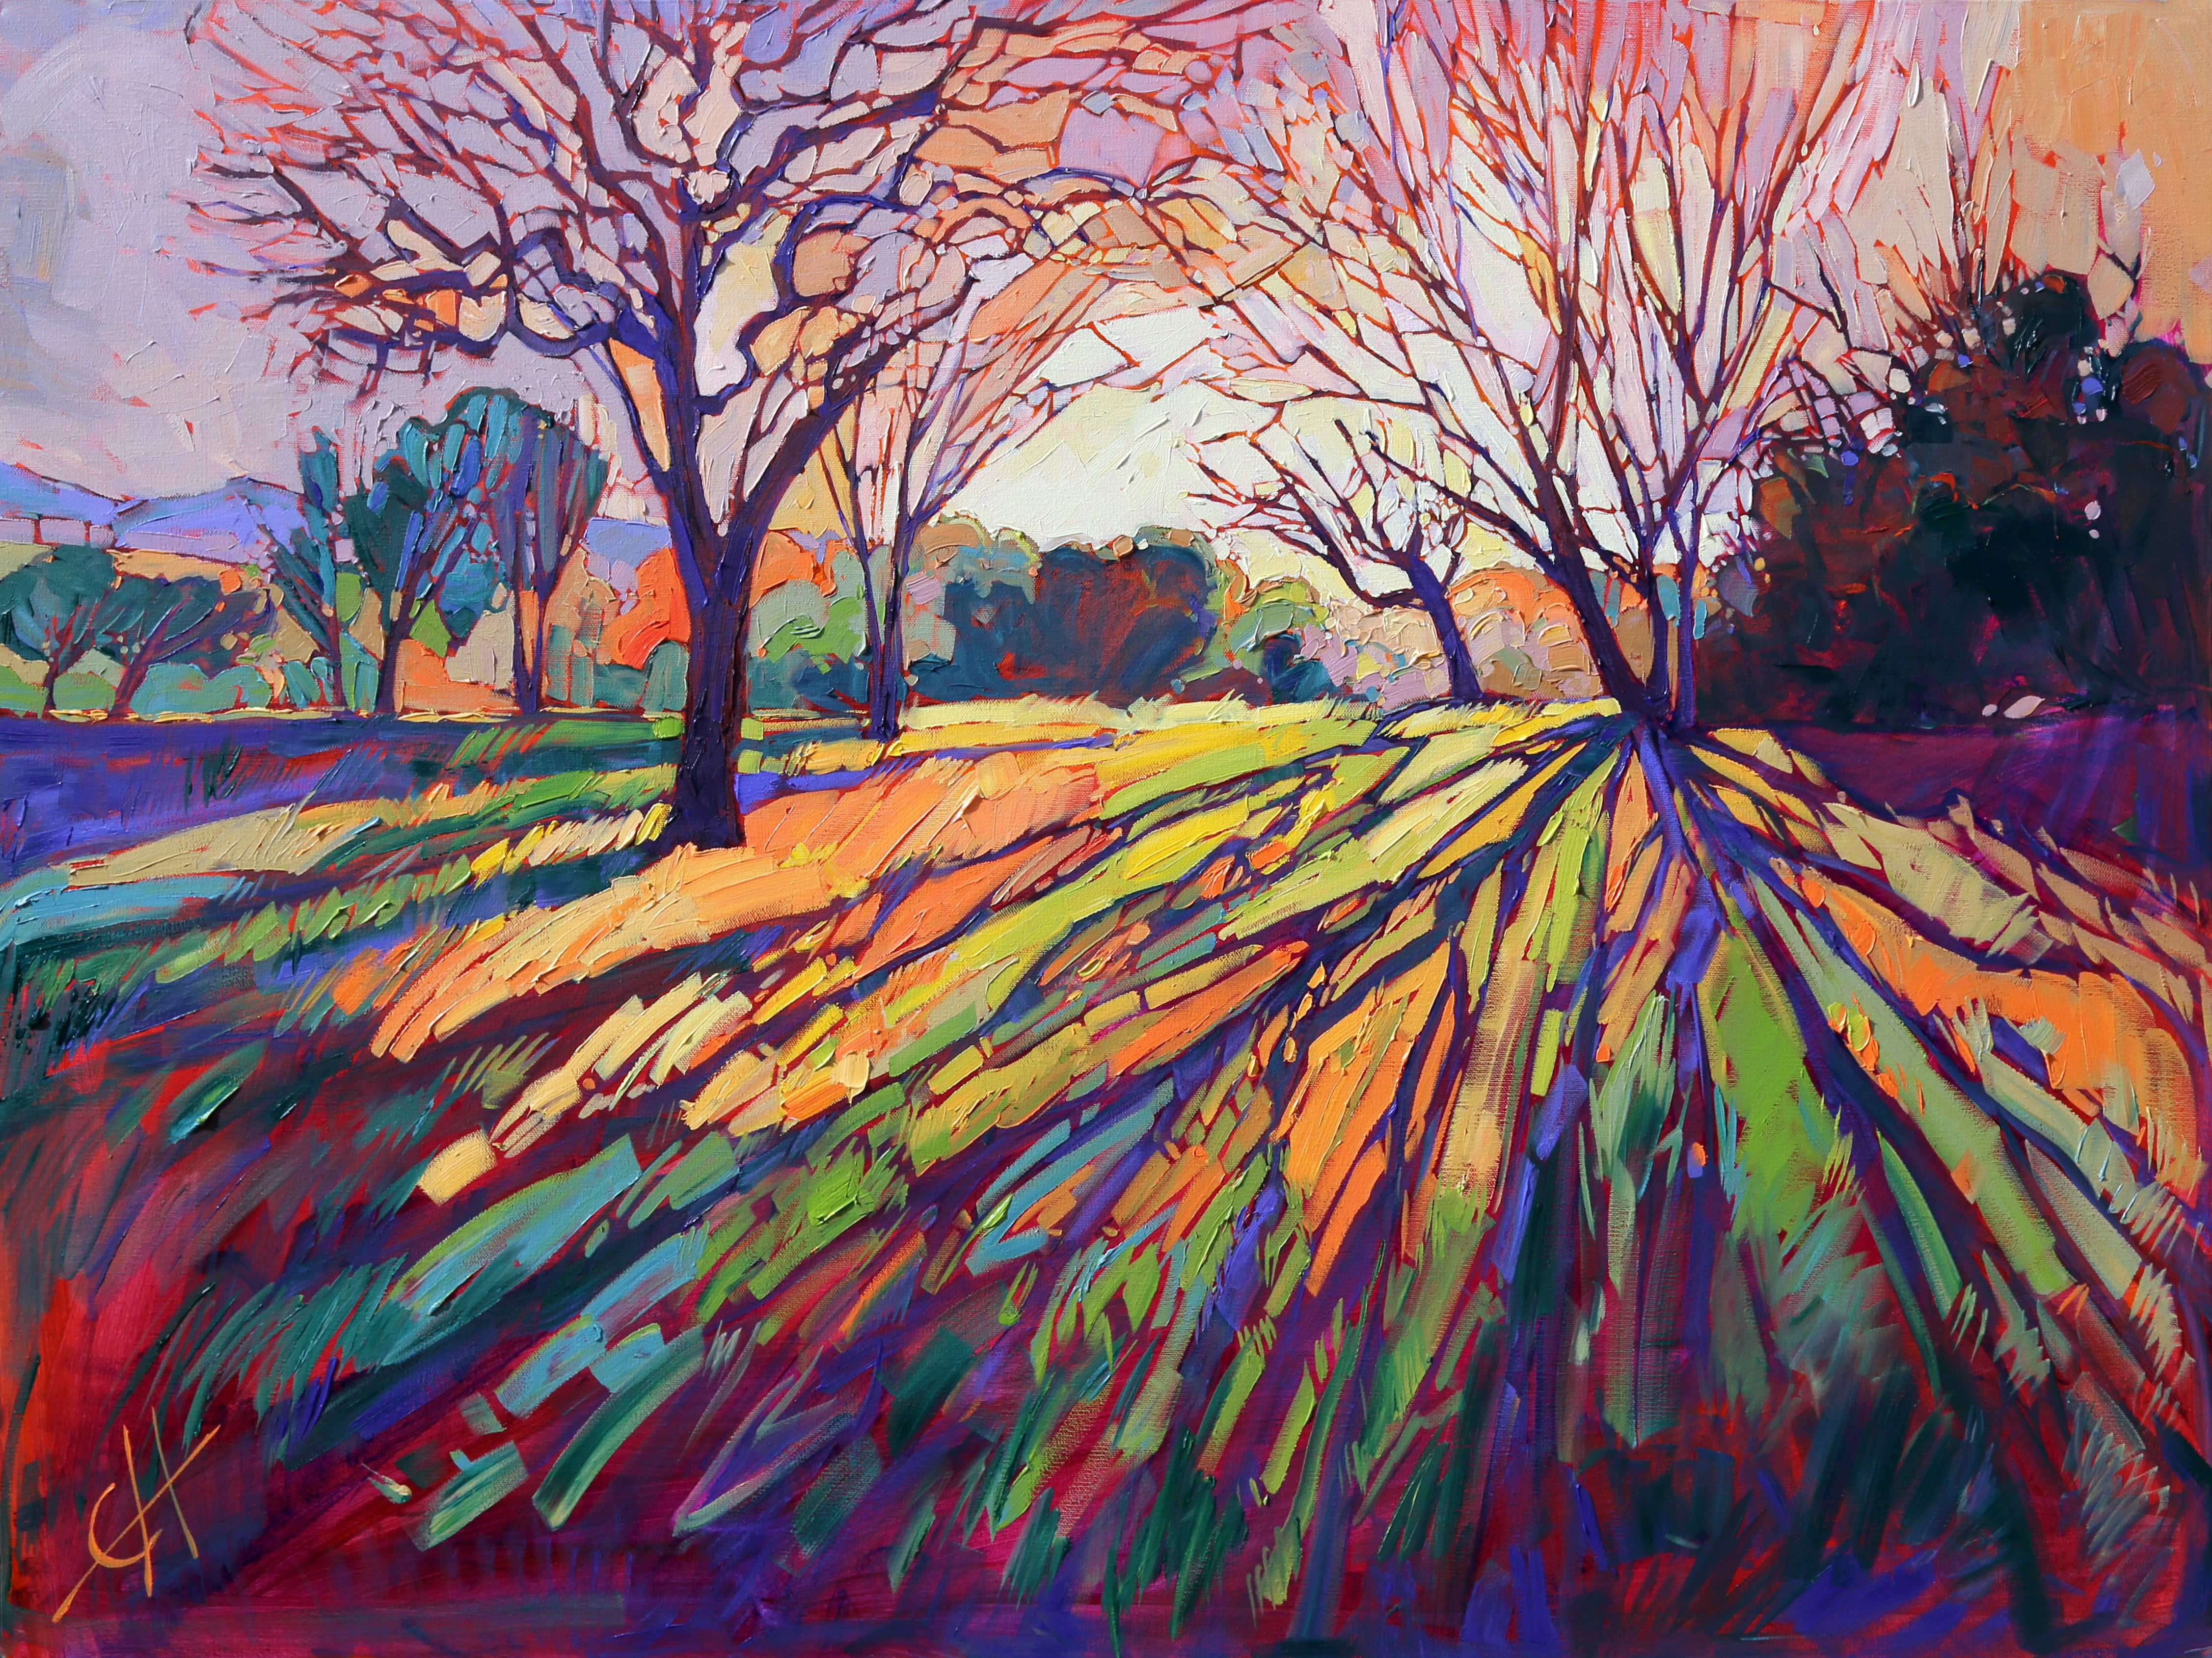 &nbsp;Available Paintings Discover the contemporary impressionist who is inspiring millions: Erin Hanson, the founder of Open Impressionism, has captured the imagination of art enthusiasts around the world. Her passion for natural beauty is seen in her work as she transforms vistas familiar and rare into stunning interpretations of bold color, playful rhythms, and raw emotional impact. As an iconic, driving force in the rebirth of contemporary Impressionism, Hanson is quickly recognized as a prolific, modern master.  here  to view Erin Hanson&#39;s portfolio of original oil paintings.&nbsp; Erin Hanson paintings sell quickly, often before they are dry. Here is a link to Hanson&#39;s&nbsp; currently available &nbsp;works.&nbsp;